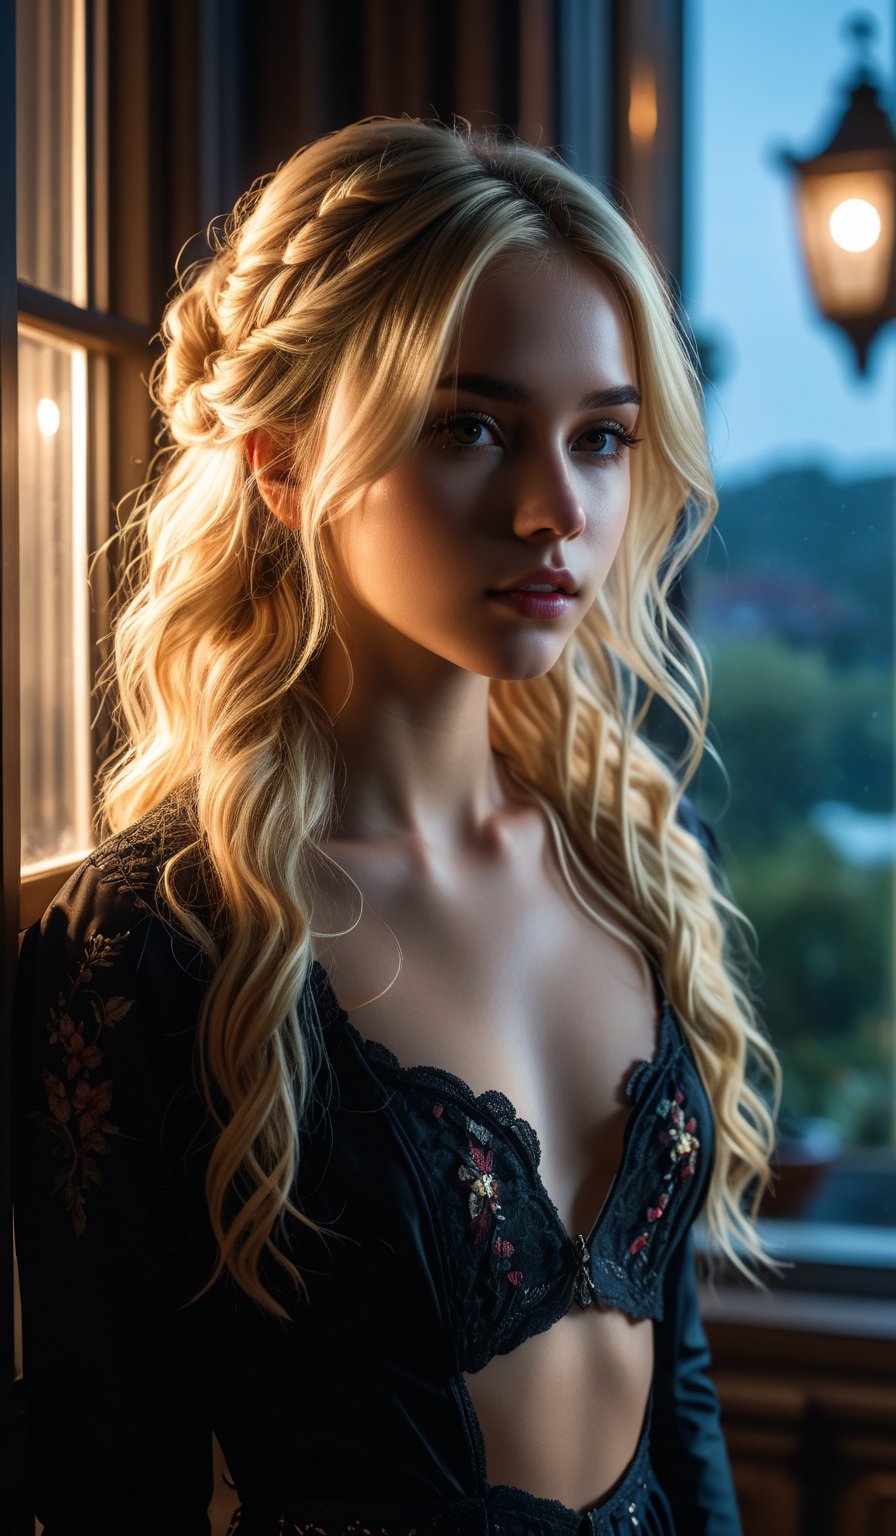 4k, 8k, ultra highres, raw photo in hdr, sharp focus, intricate texture, skin imperfections, realistic, detailed facial features, highly detailed face, posing,dark lighting,night time,((night)),window,moonlit,low lighting,long hair,(blonde hair),standing,full body,dark room
,midjourney,mansion,emo,Enhance